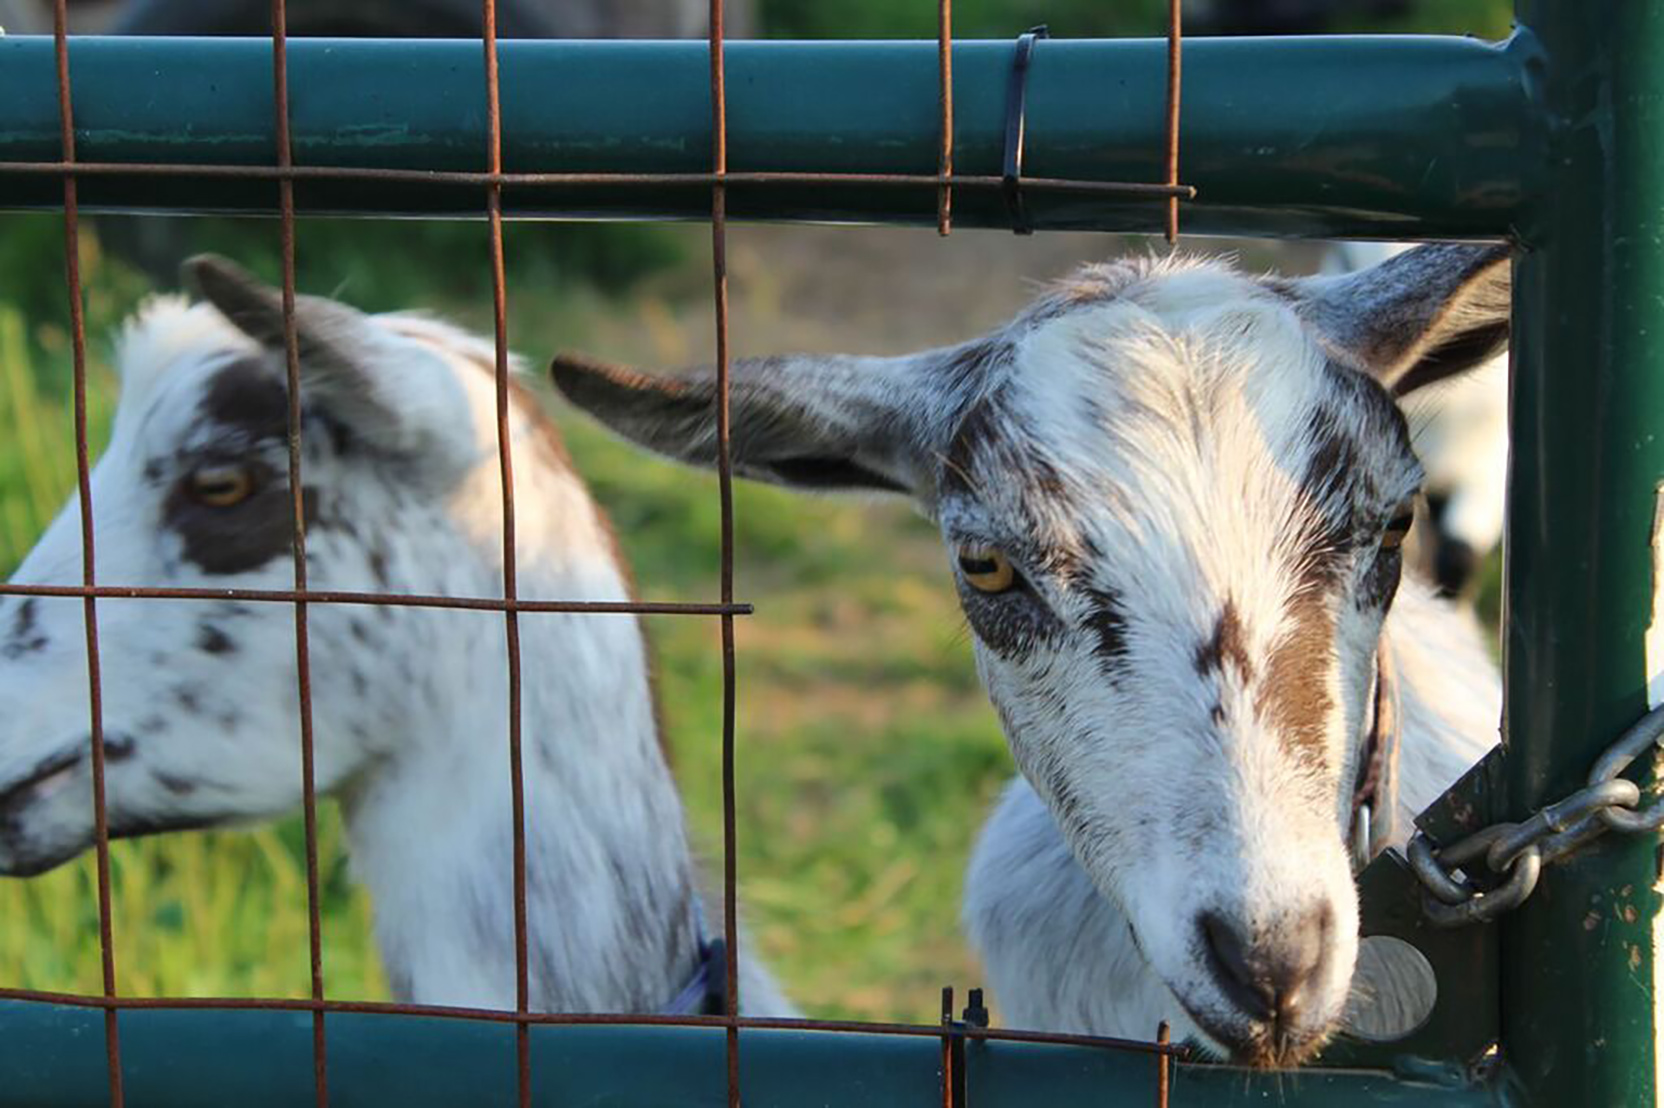 Close-up of a goat sticking its head through a hole in a fence while another goat stands close by